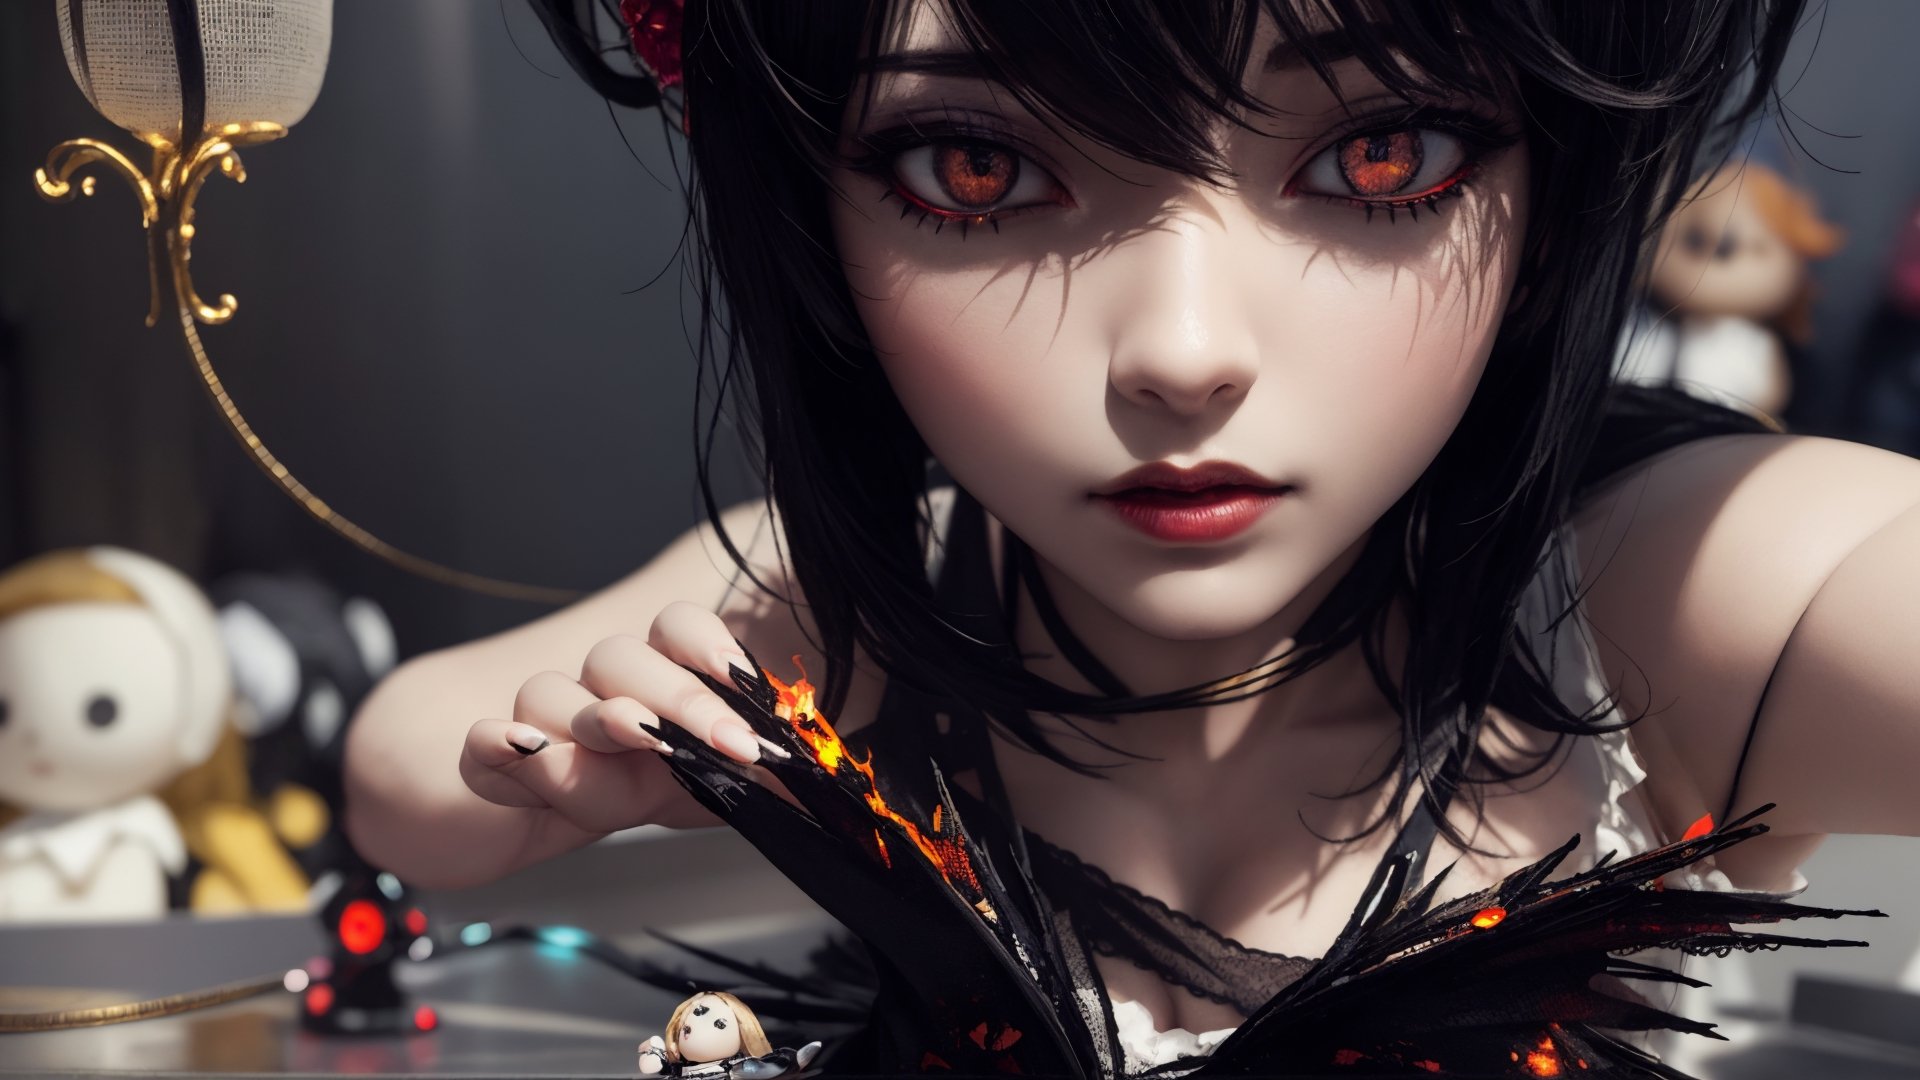 demon_doll,punk-hair,anime fire-opal-eyes,slim-body,curvy hips,1wing black,tattered-torn-punk-clothing,pursed lips,real-doll-style, doll-joints,80's-style glamour-shot,realistic photograph, source lighting, rim lighting, radial lighting,color-boost,intricate, ornate, elegant and refined,glowing-blacklight-illumination,3D,Action Figure,Anime,Doll,Fashion,best quality,masterpiece